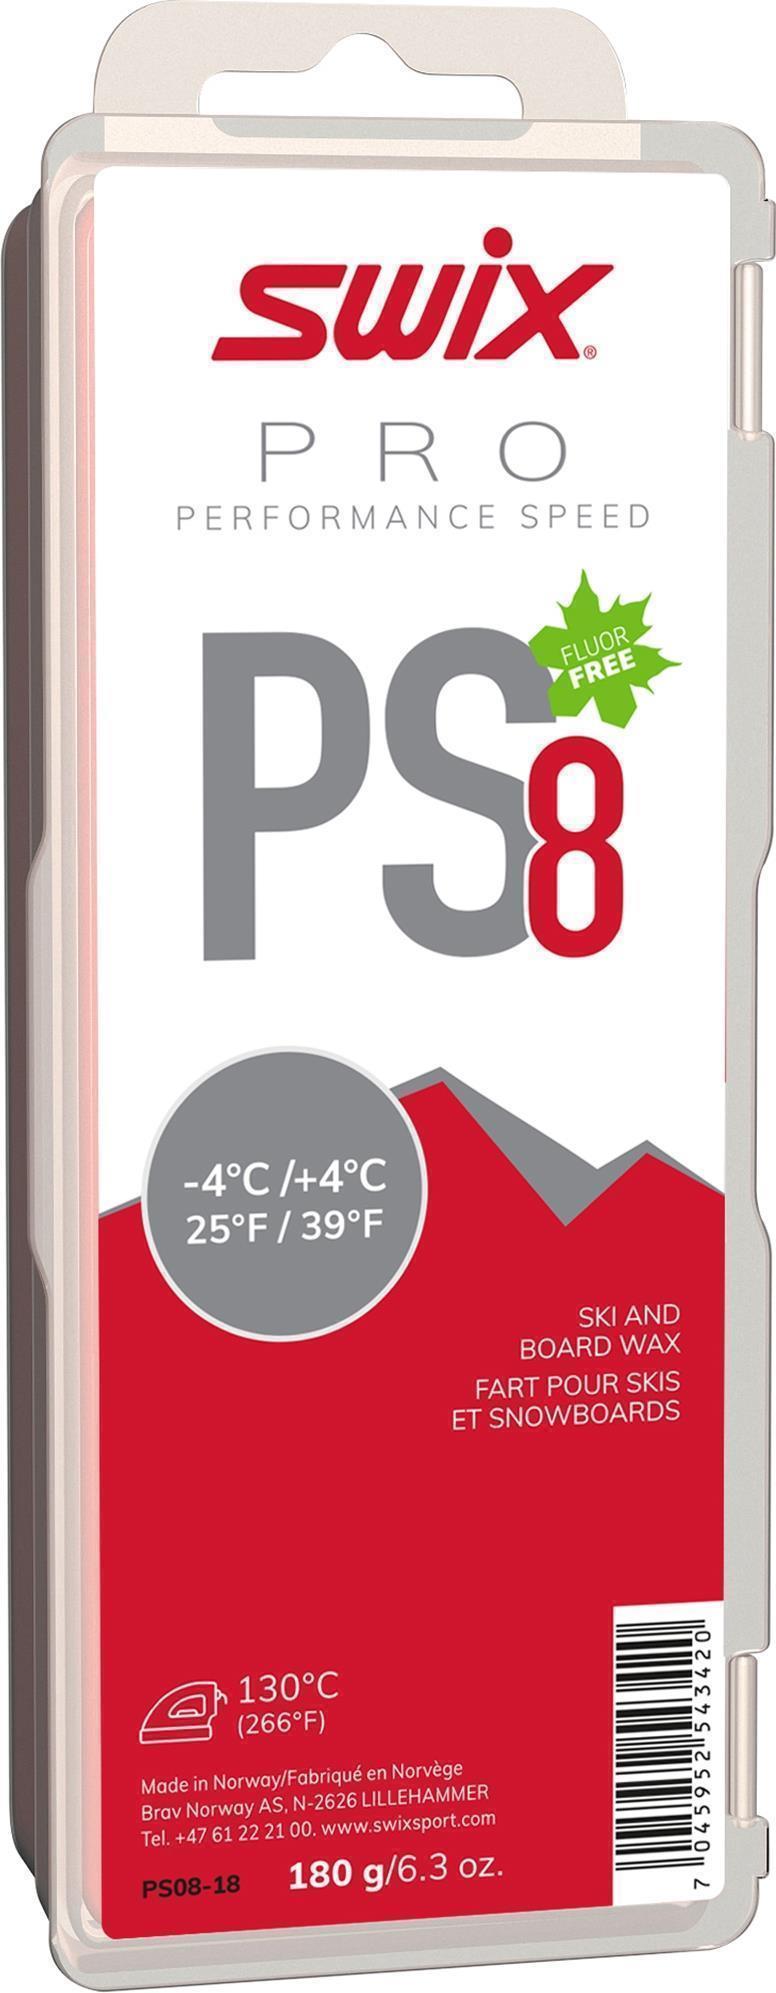 PS8 Wax, -4C to 4C, 180g - Red